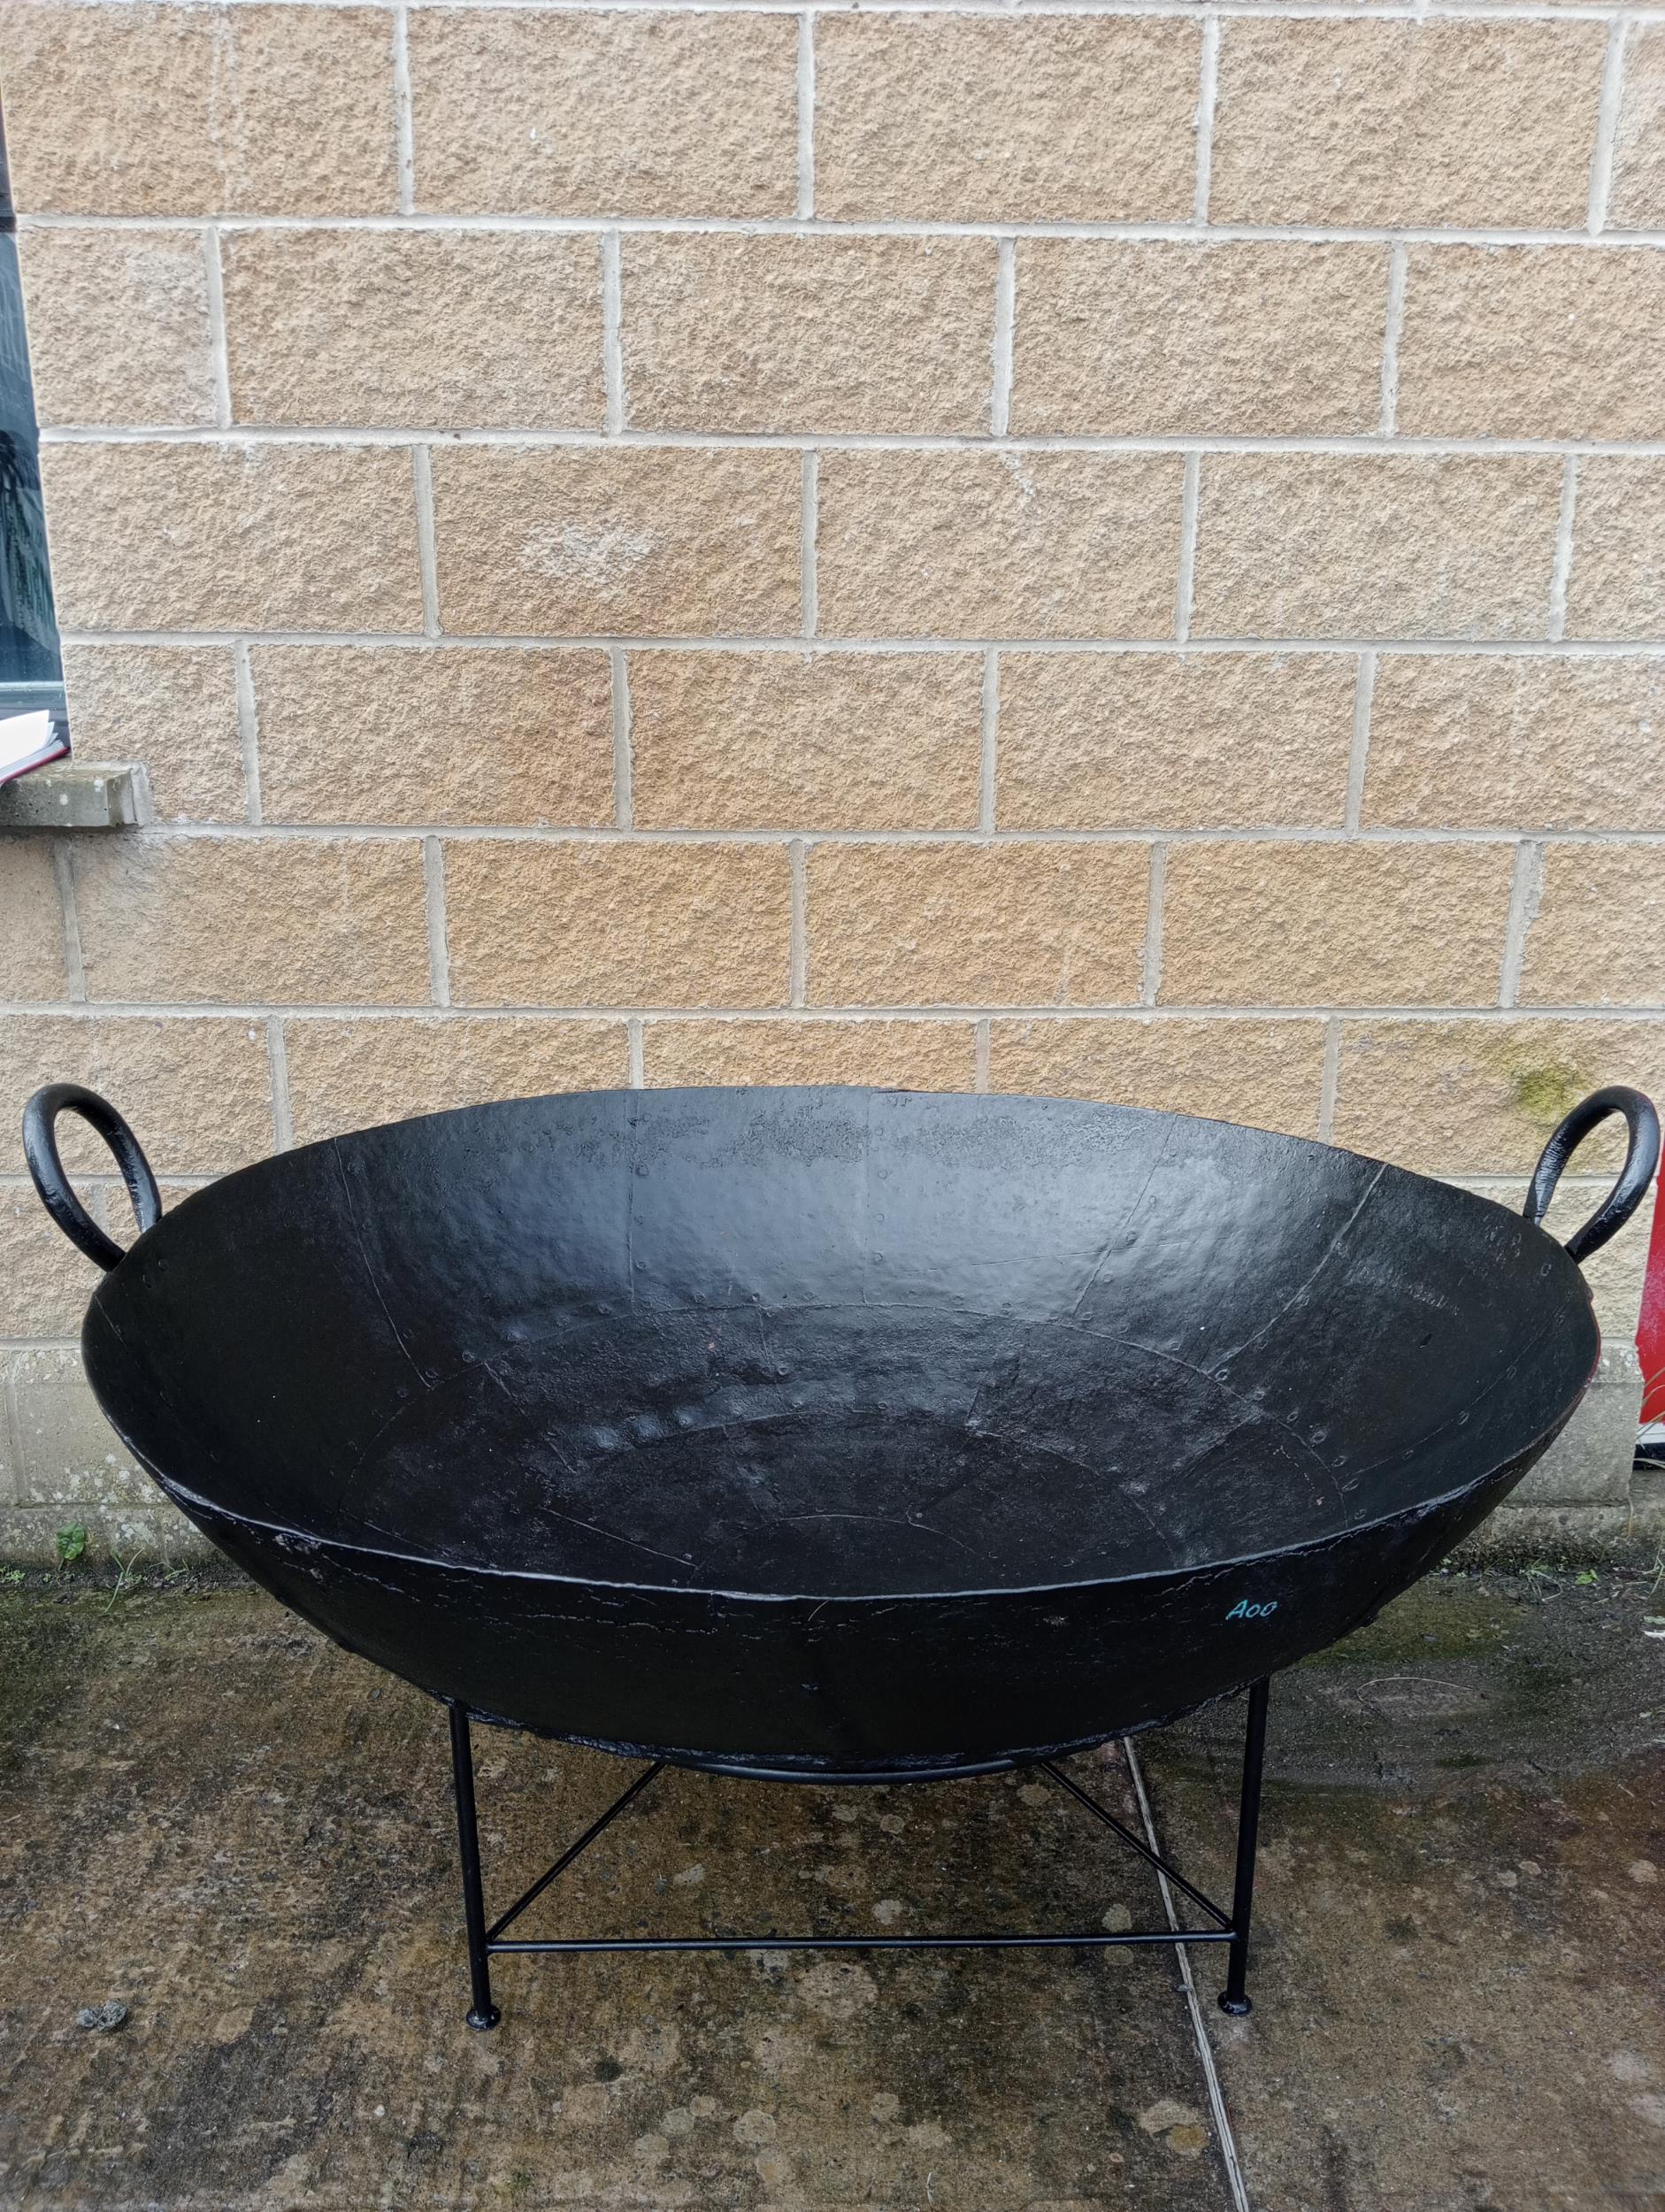 Large steel fire pit {H 86cm x Dia 130cm }. (NOT AVAILABLE TO VIEW IN PERSON) - Image 5 of 5